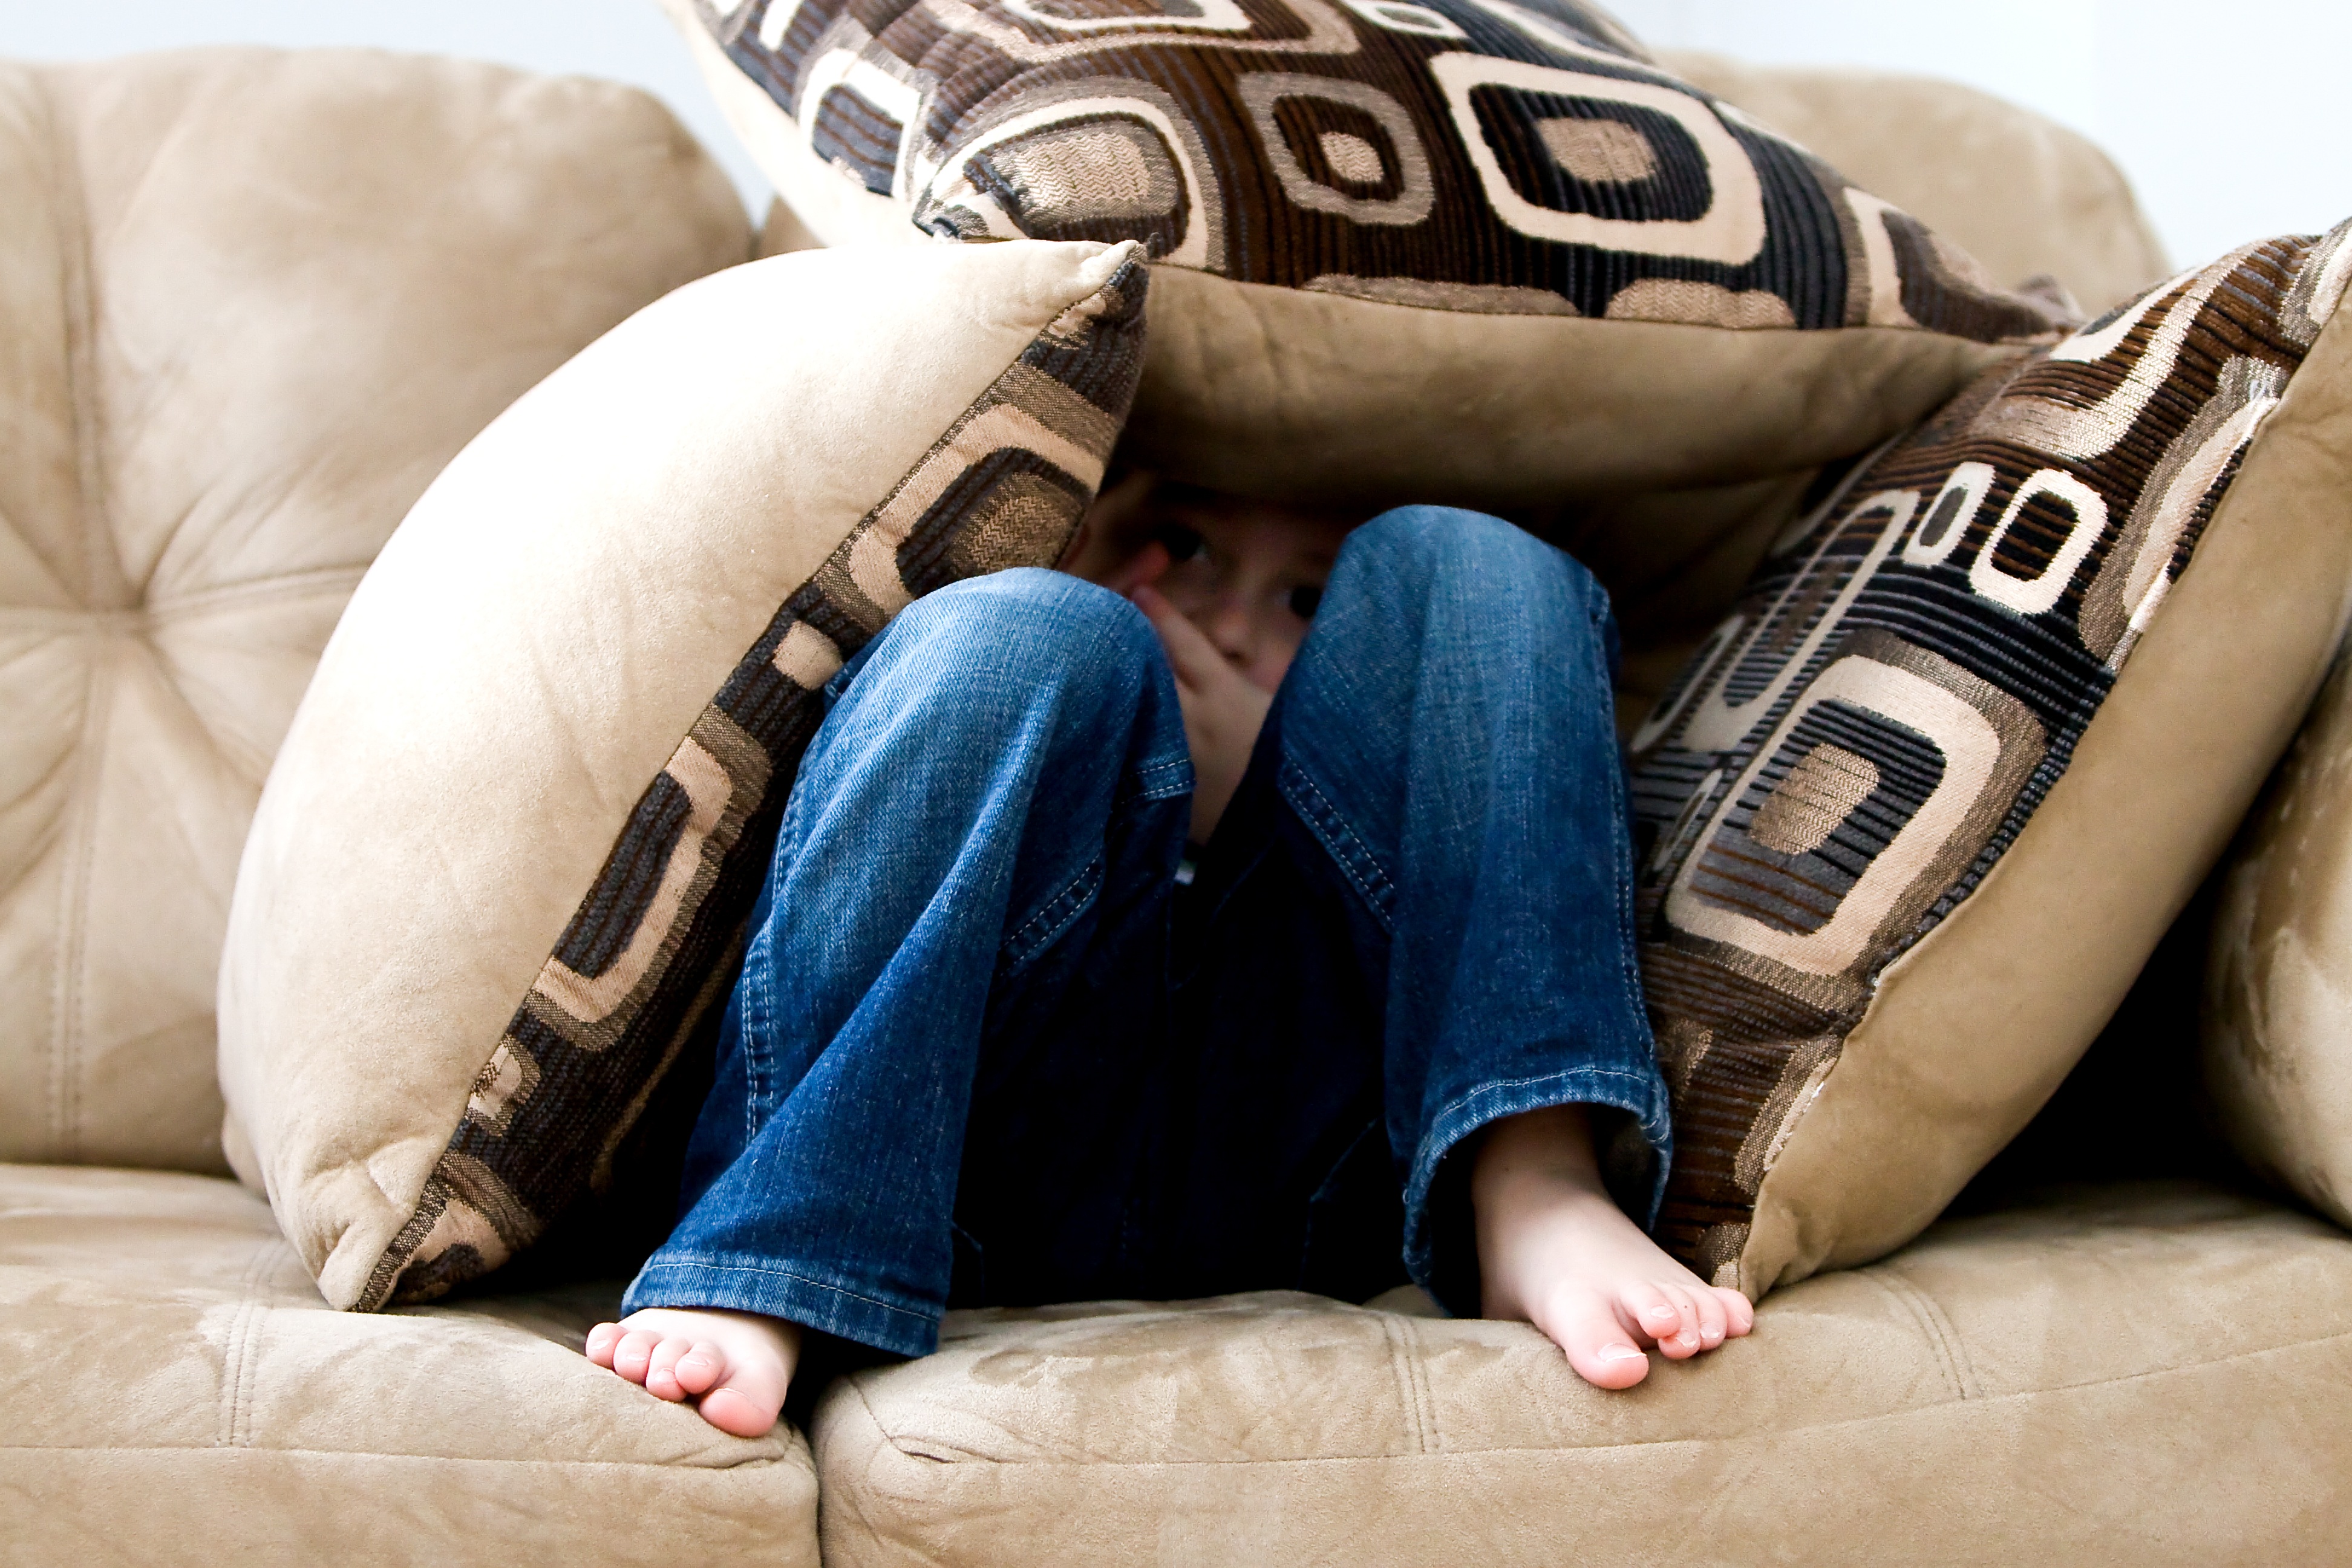 Child hiding in couch cushions